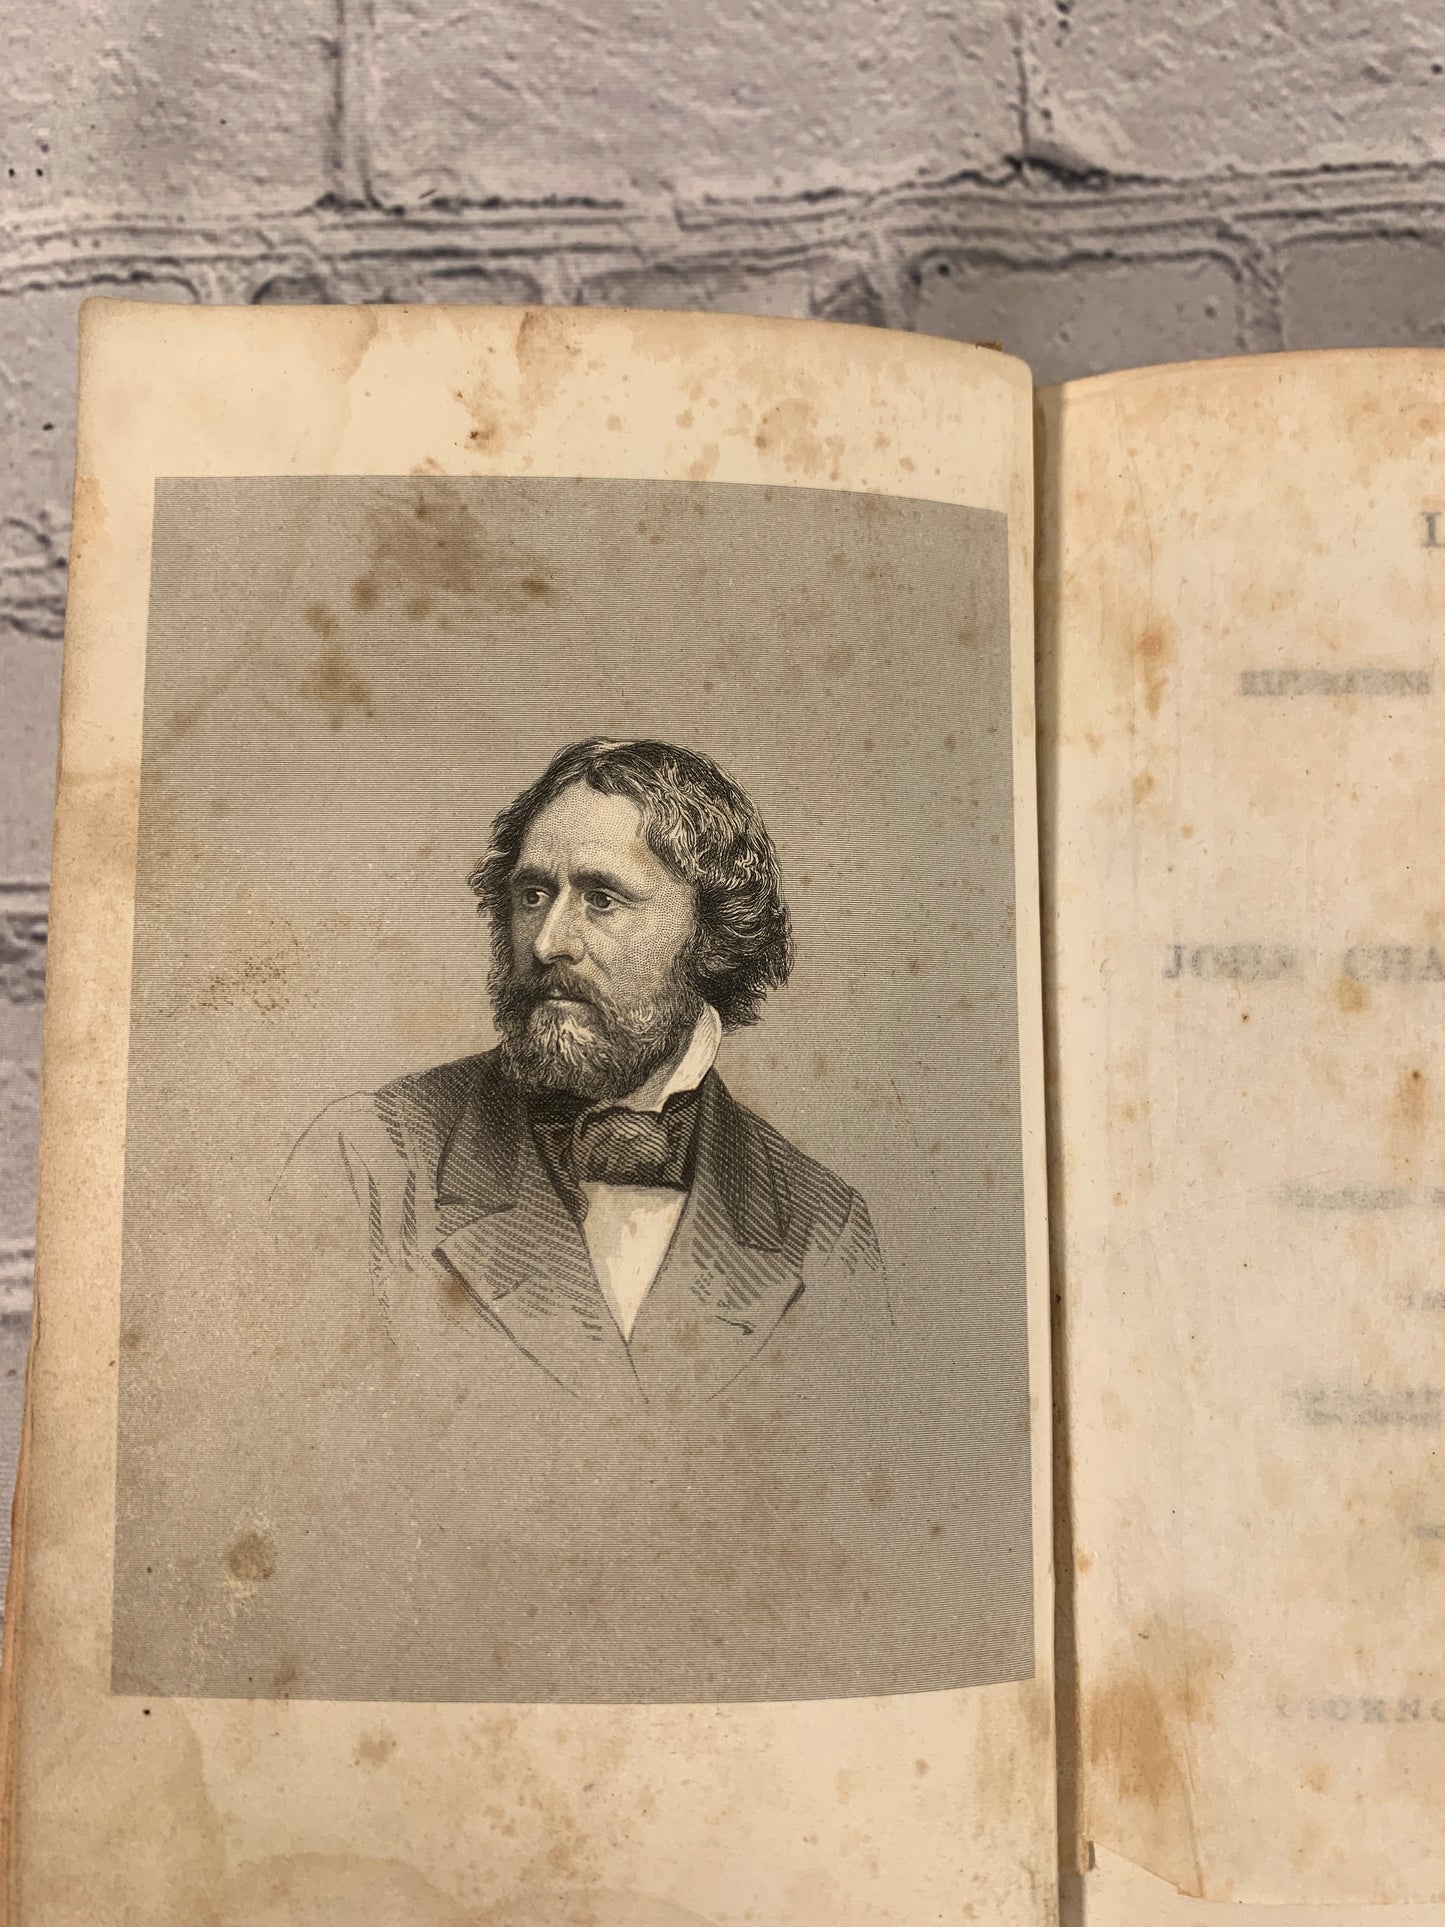 Life: Explorations and Public Services of John Charles Fremont by Upham [1856]